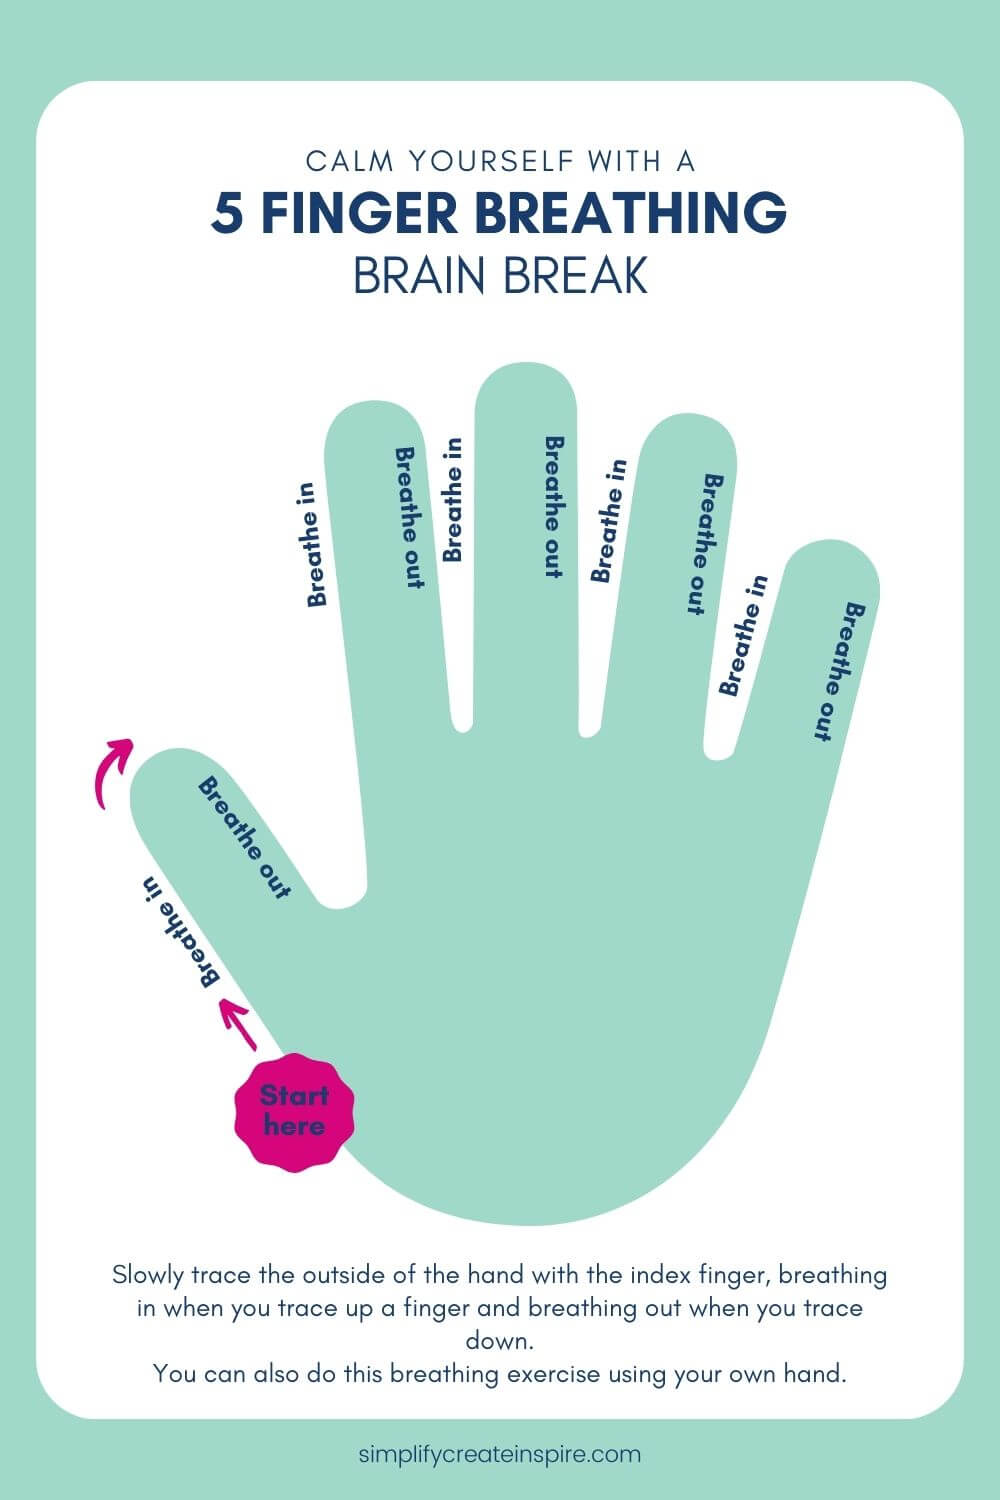 5 finger deep breathing exercise with instructions for mindfulness